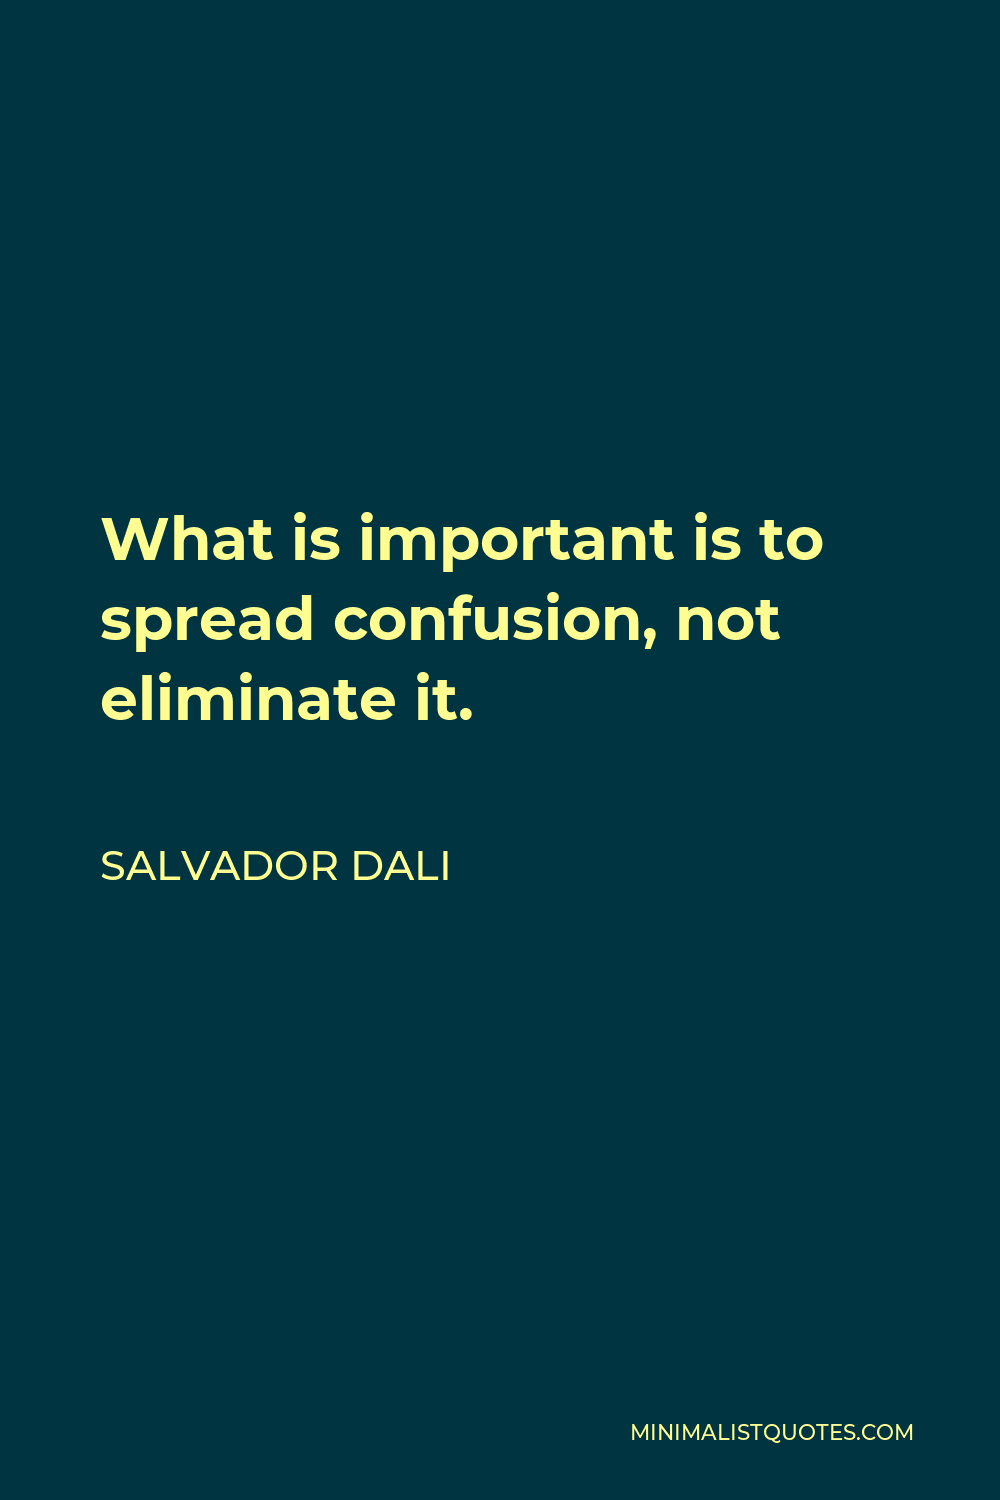 Salvador Dali Quote - What is important is to spread confusion, not eliminate it.